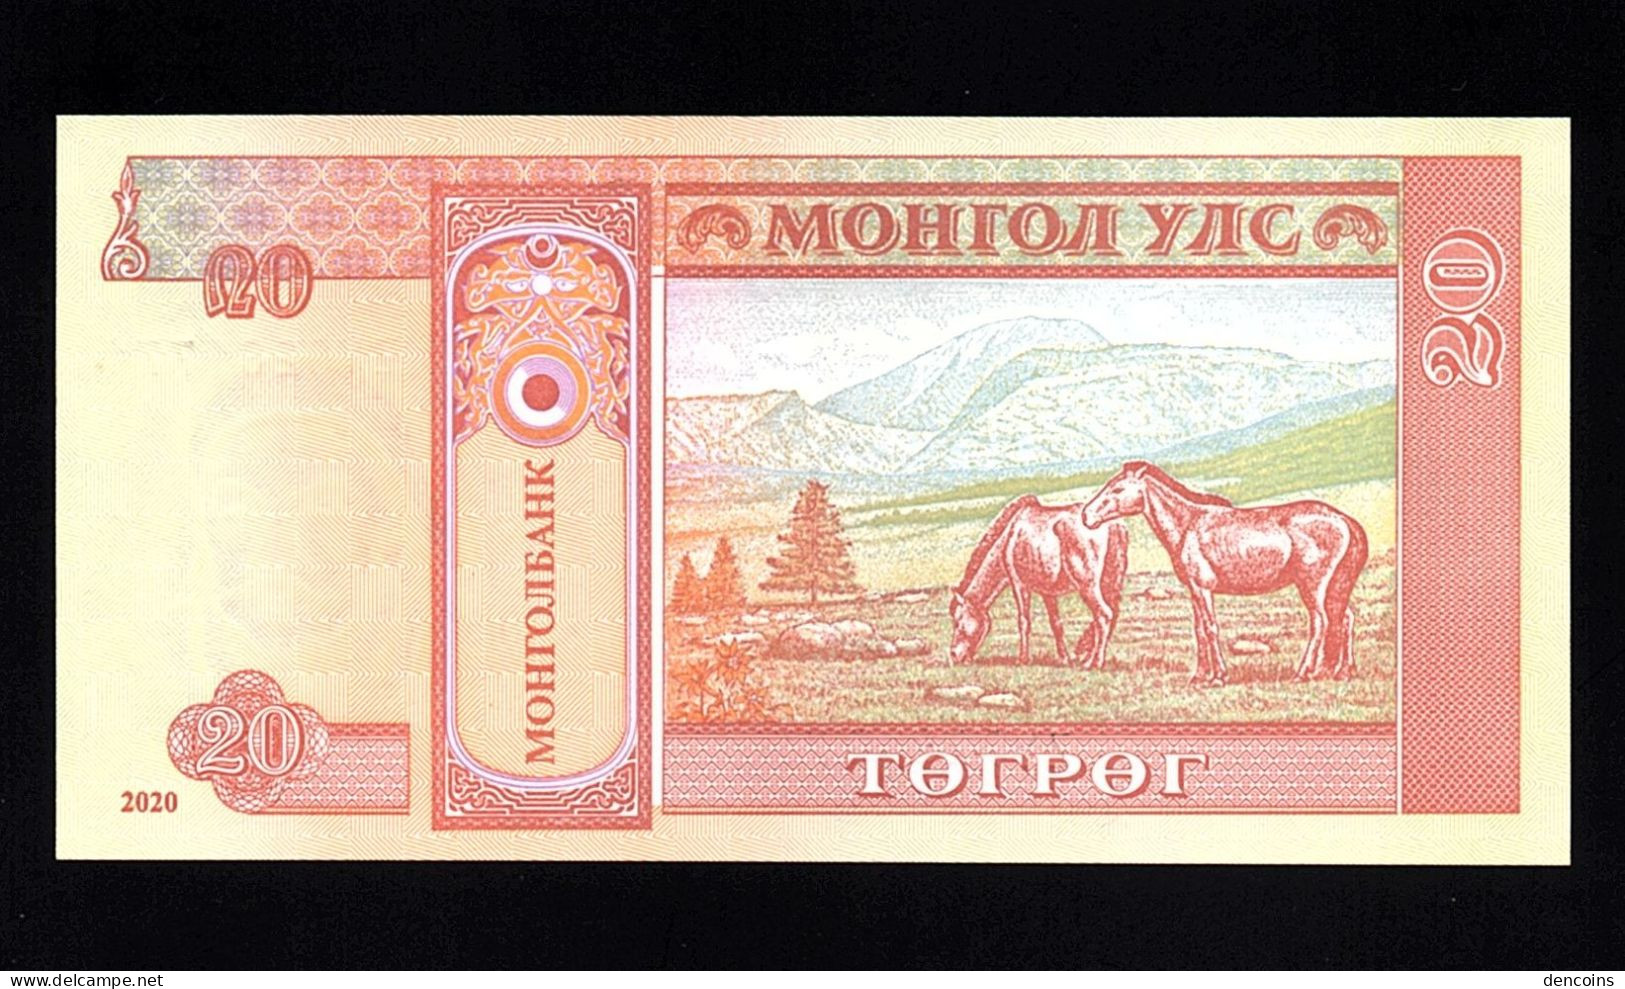 MONGOLIA P-63  20 Tugrik  2020  REPLACEMENT  -ZY-  UNC  NEUF  SIN CIRCULAR - Mongolie